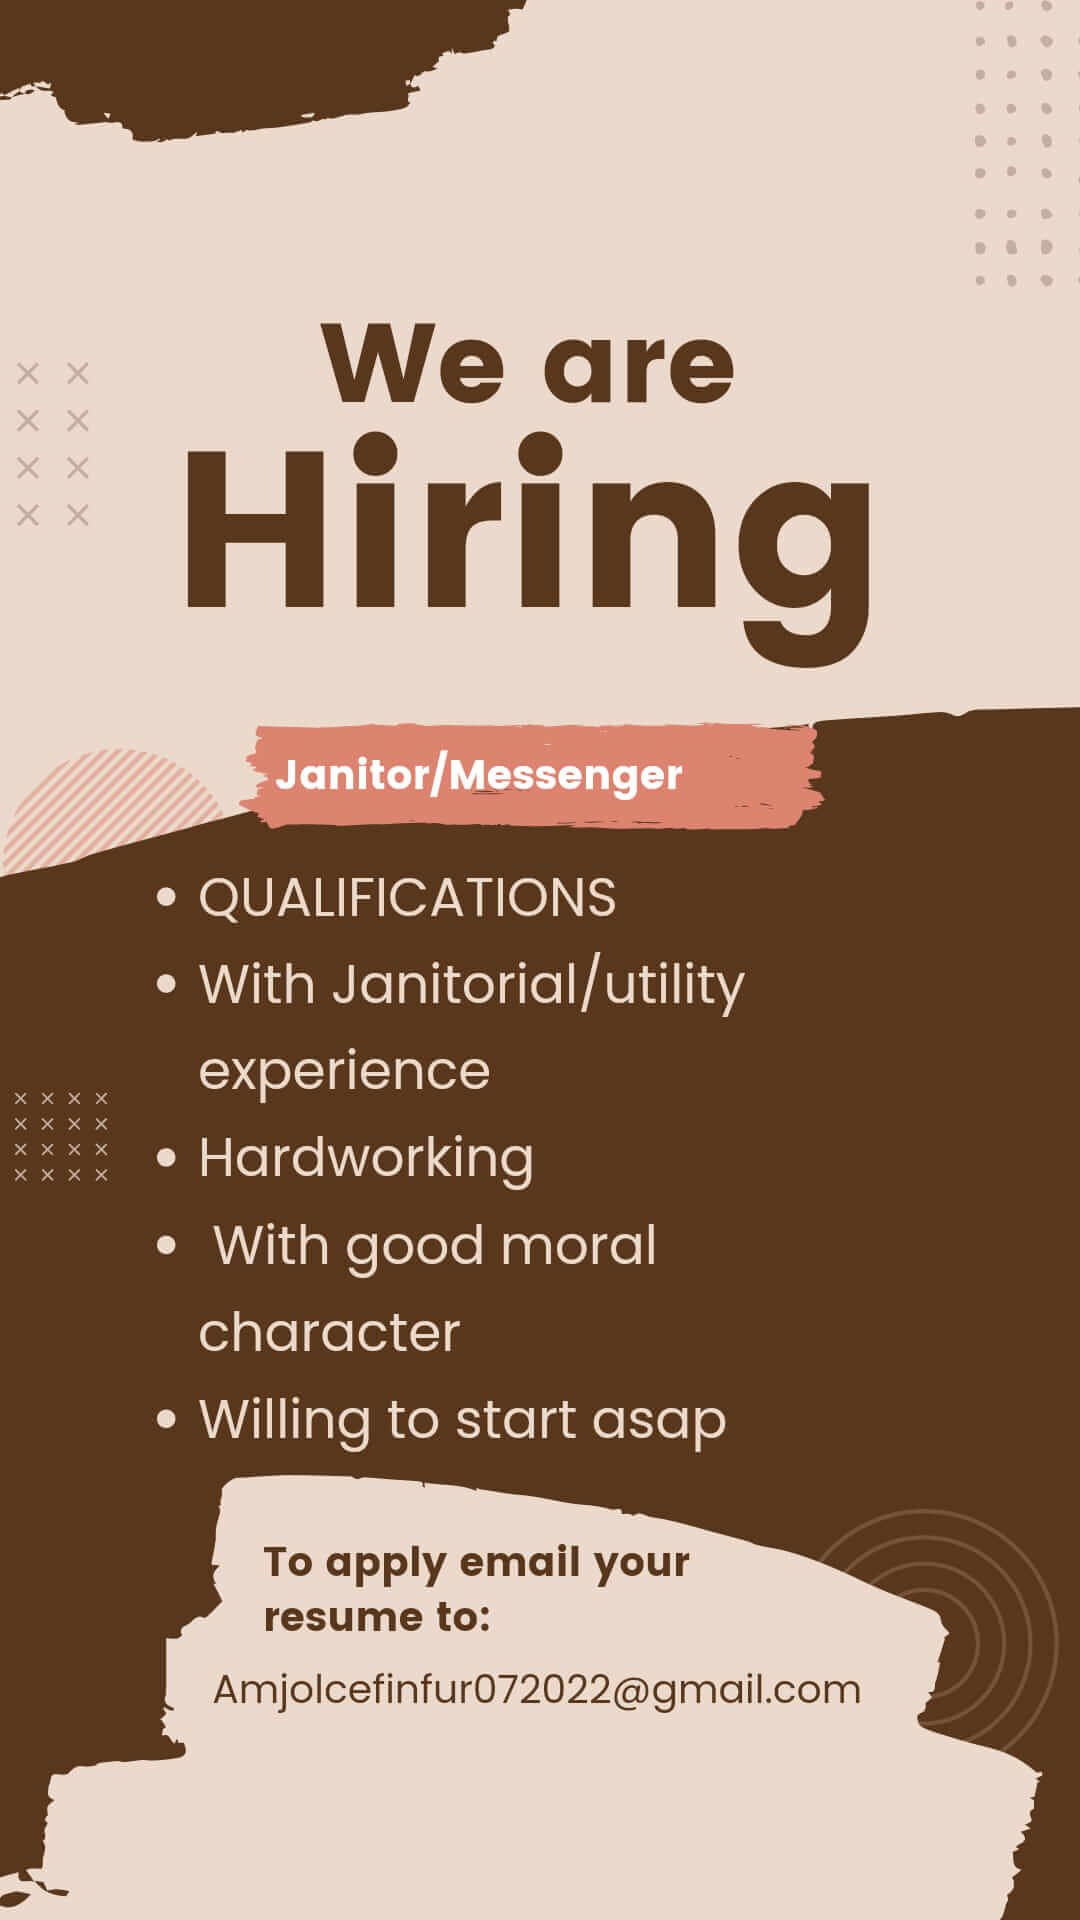 AMJOLCE FINEFUR INTERIOR is looking for Amjolce Janitor/Messenger